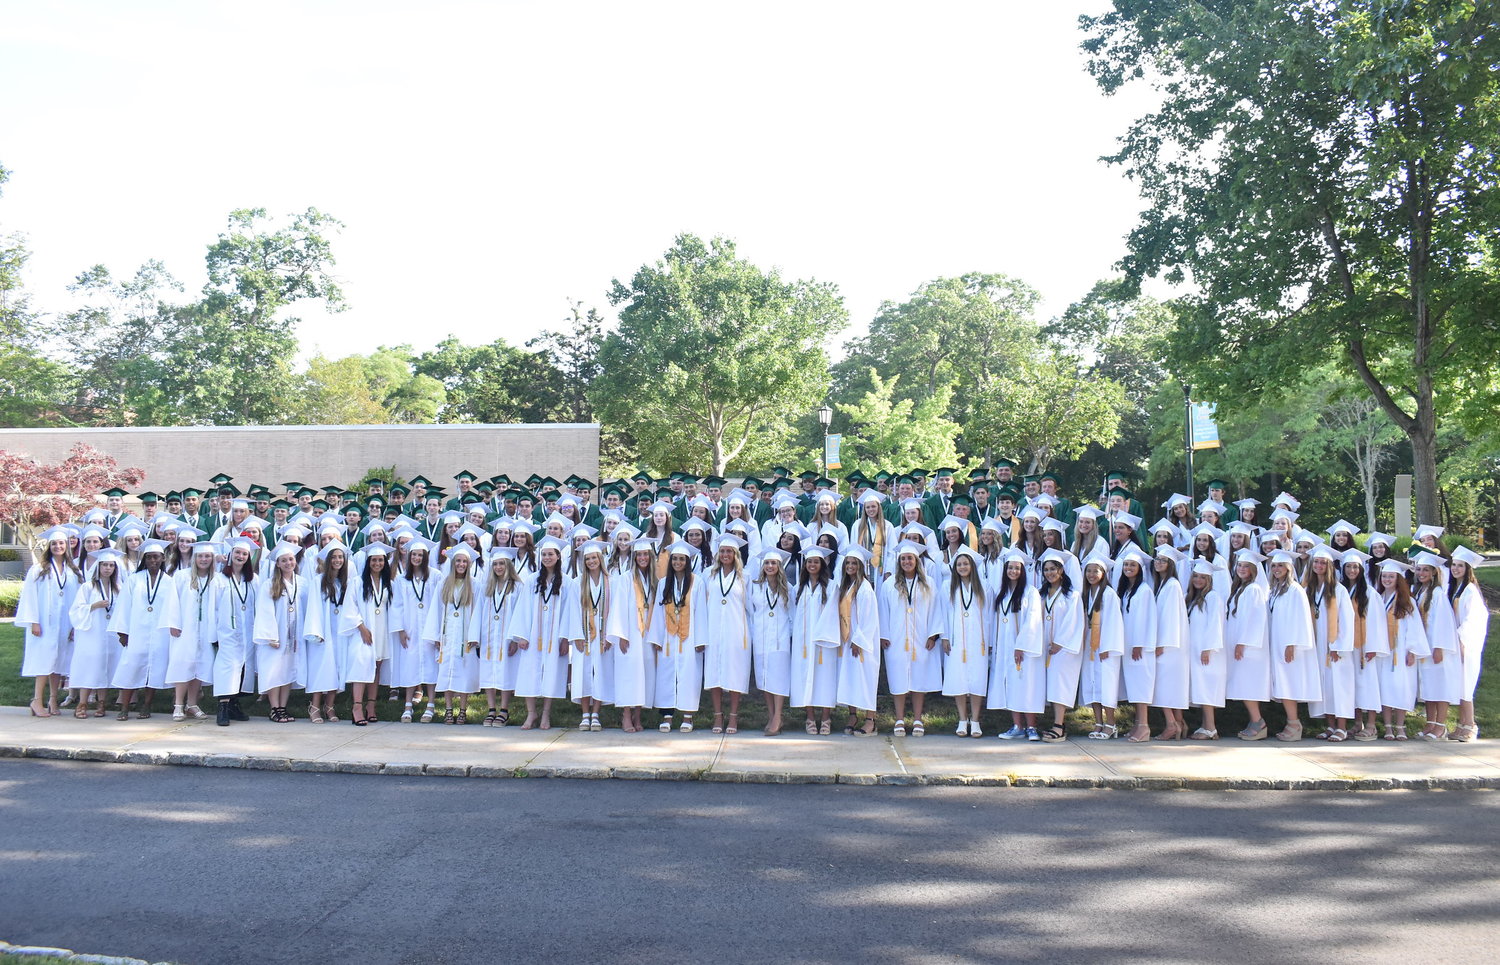 Seaford High School’s graduation ceremony for the class of 2021 was held last Saturday at the Tilles Center.